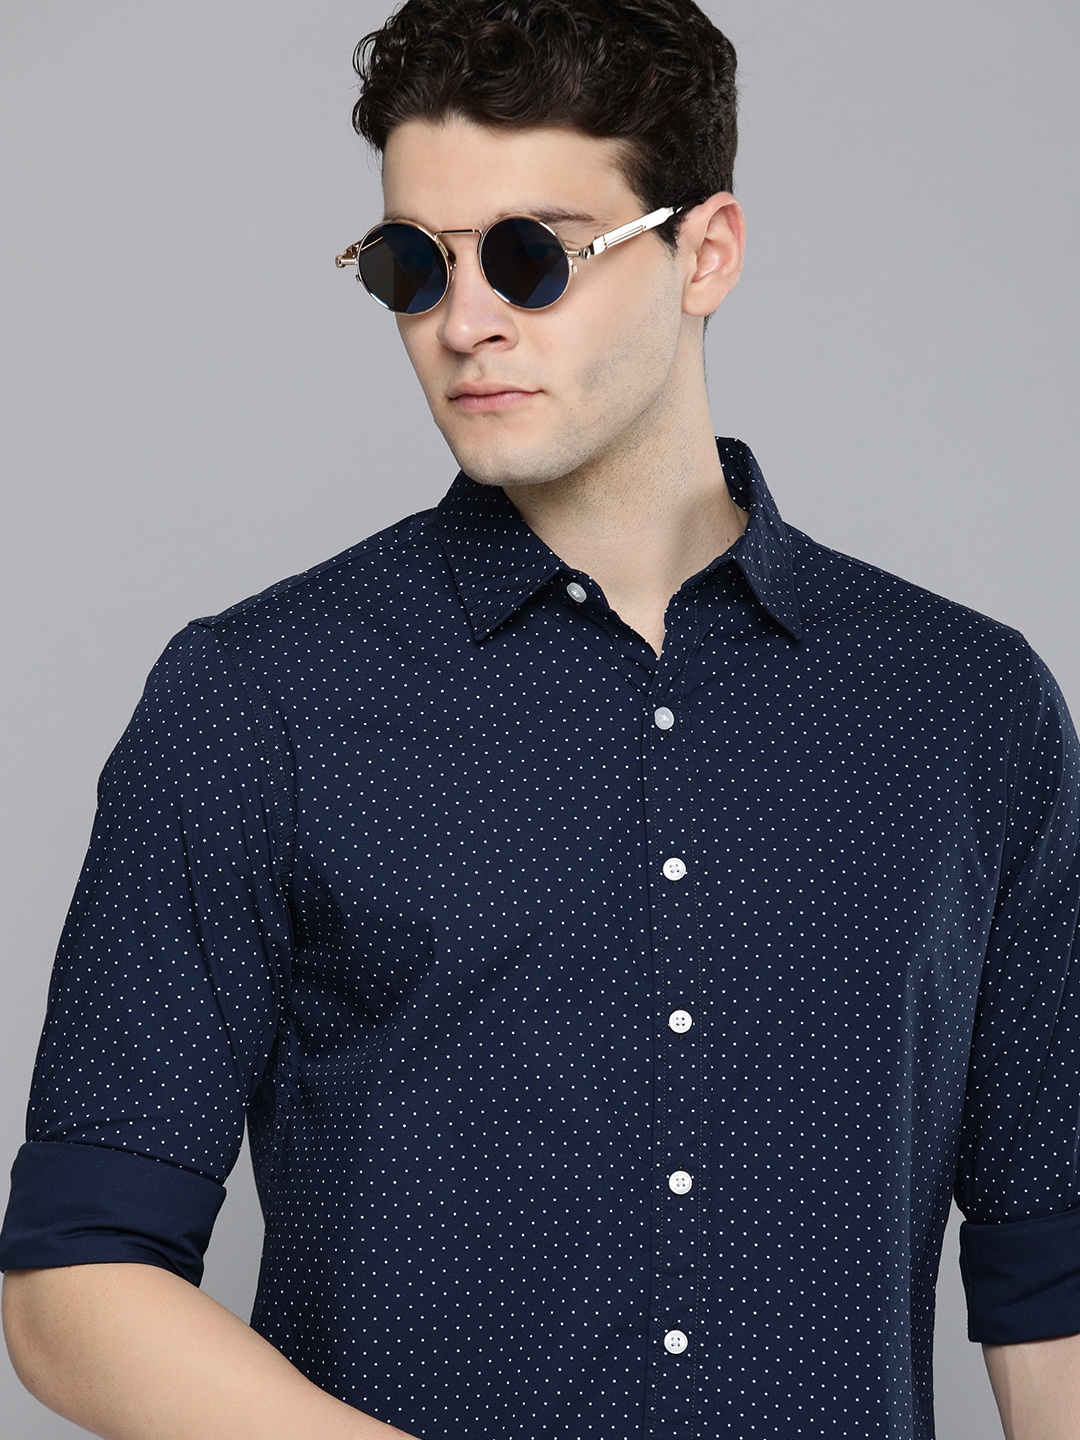 Levis Slim Fit Polka Dot Opaque Printed Casual Shirt